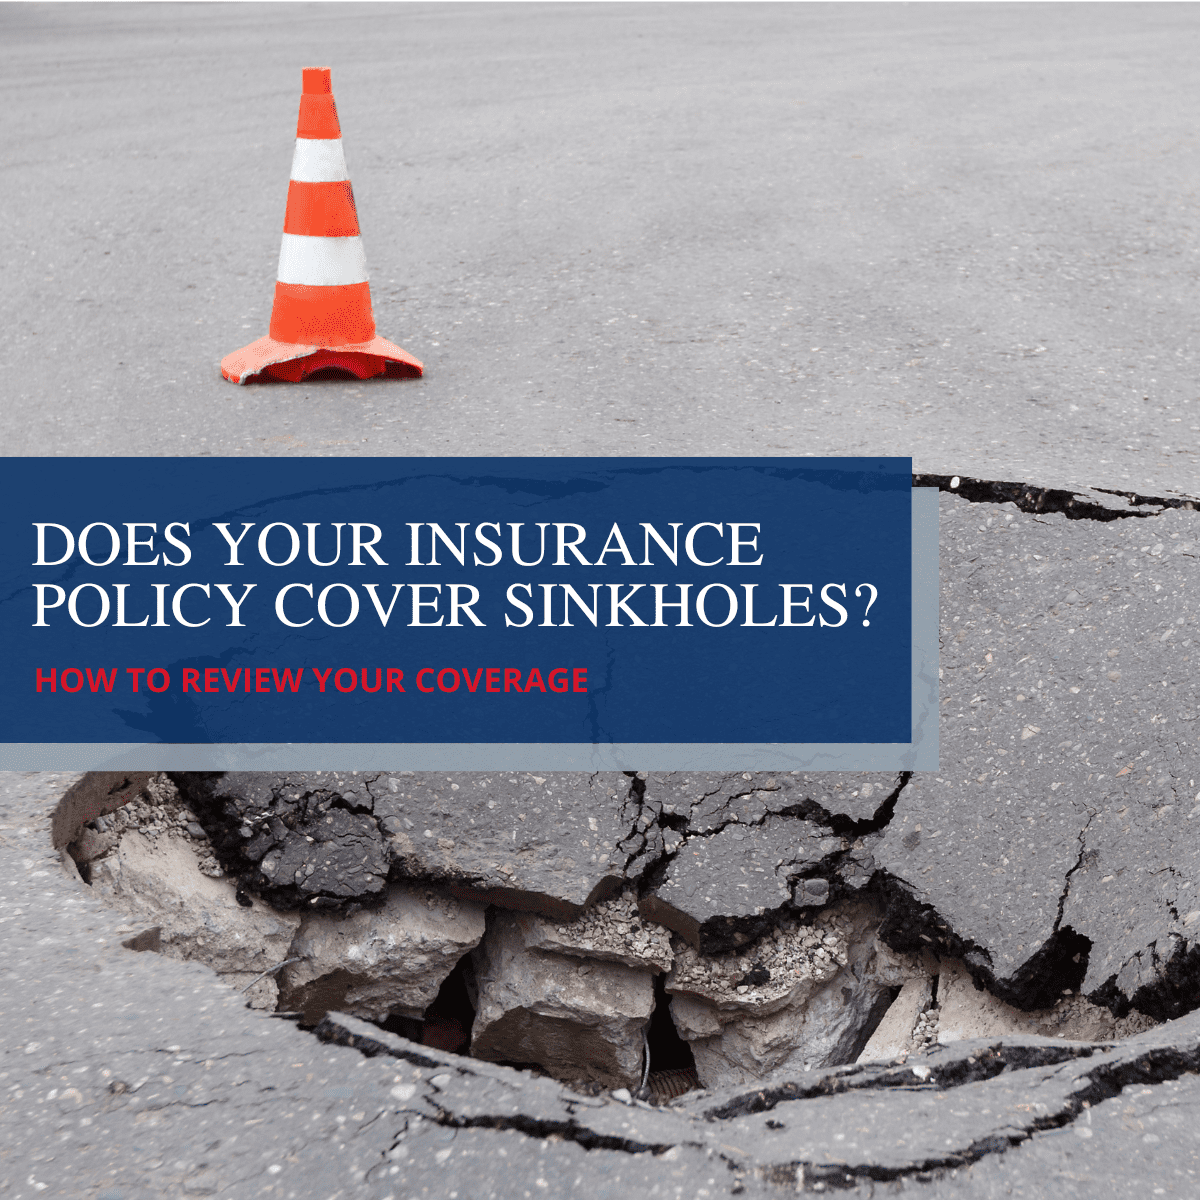 Does Your Insurance Policy Cover Sinkholes?